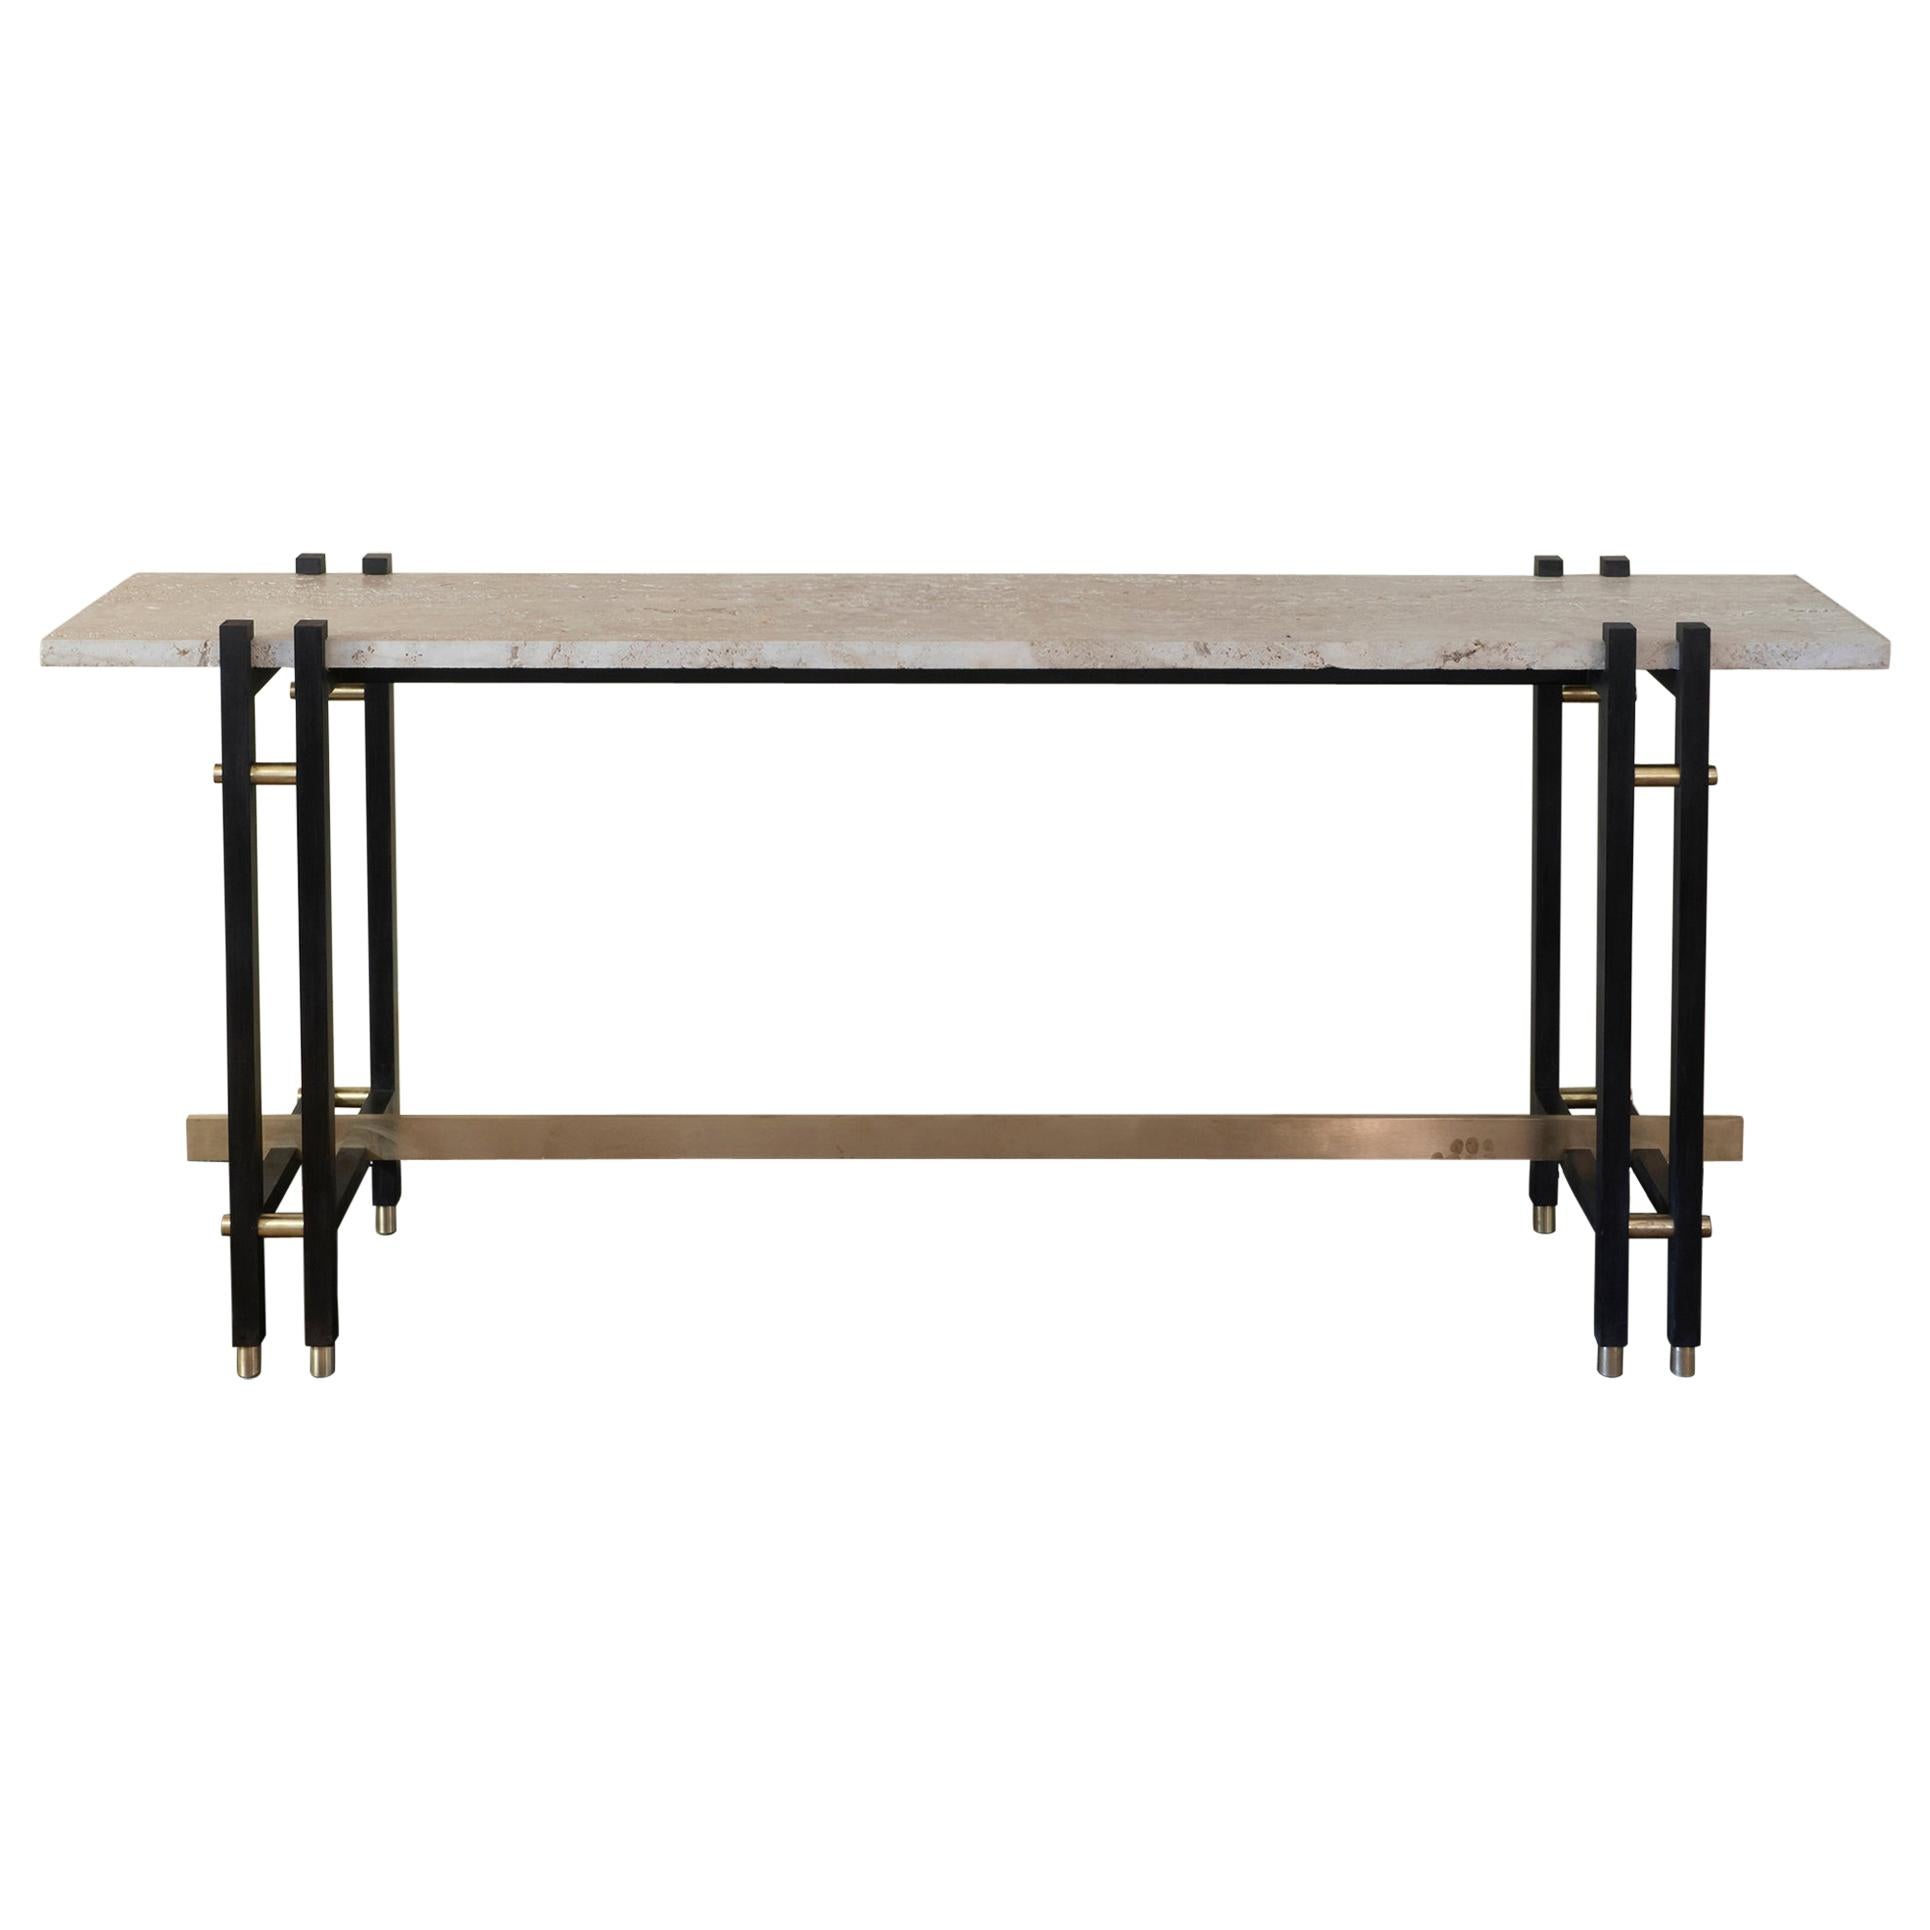 1980s French Travertine and Steel Console, Brass Details